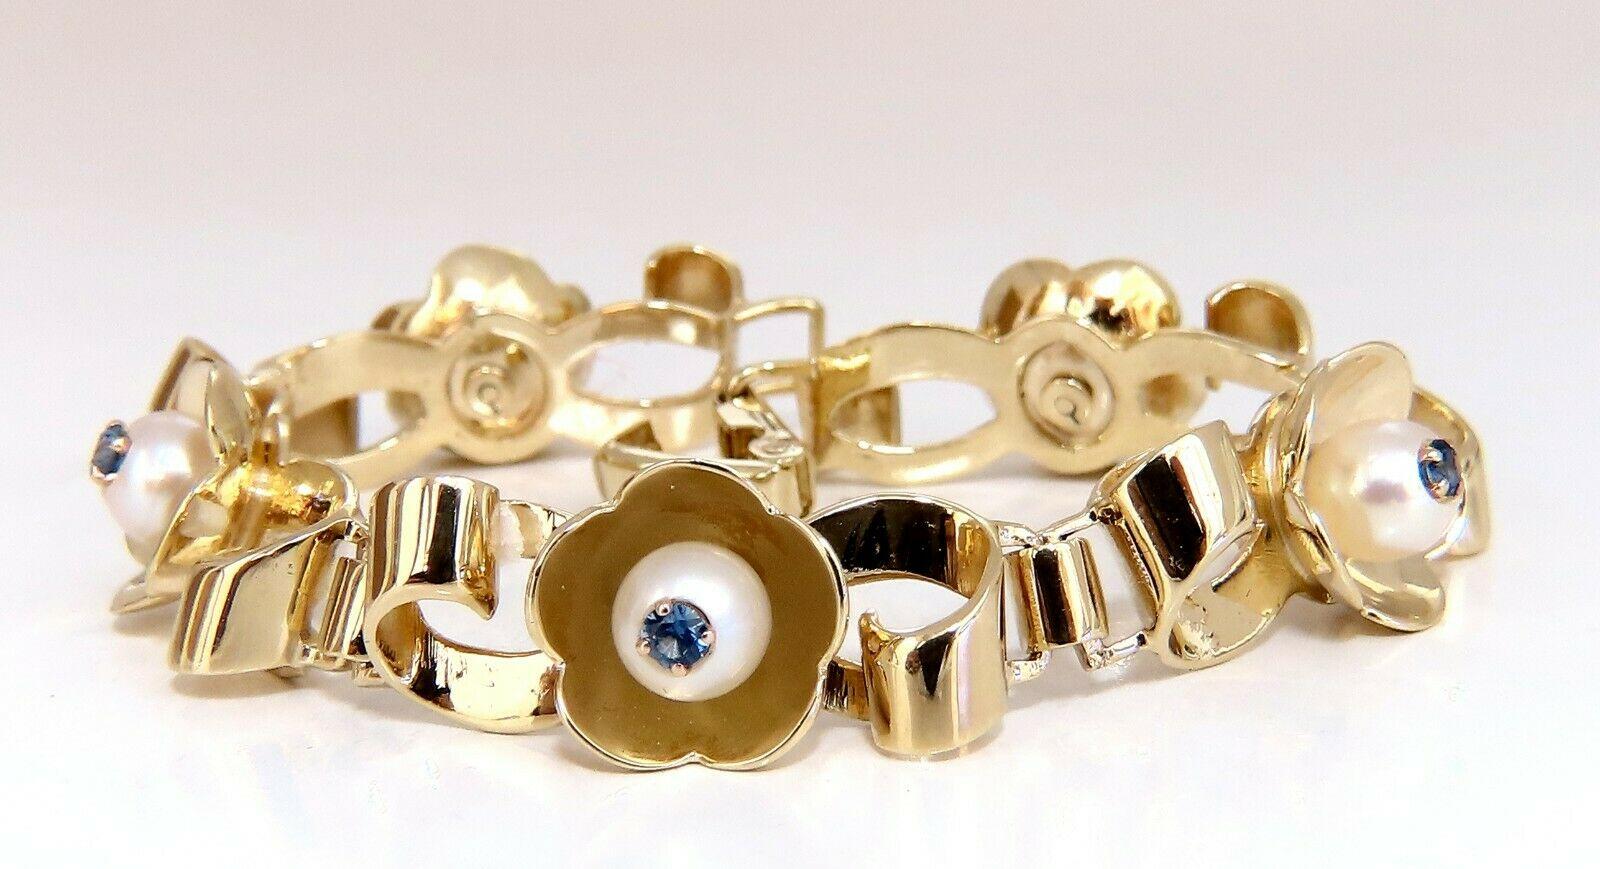 Sapphires & Pearls Floral Cluster Vintage Bracelet.
Sapphires mounted inside pearl.
.50ct Natural Round, Blue color sapphires 



6.50mm Japanese Akoya Pearls

Sapphires are of clean clarity 
Transparent and full cuts 

Bracelet is 12mm wide.

14kt